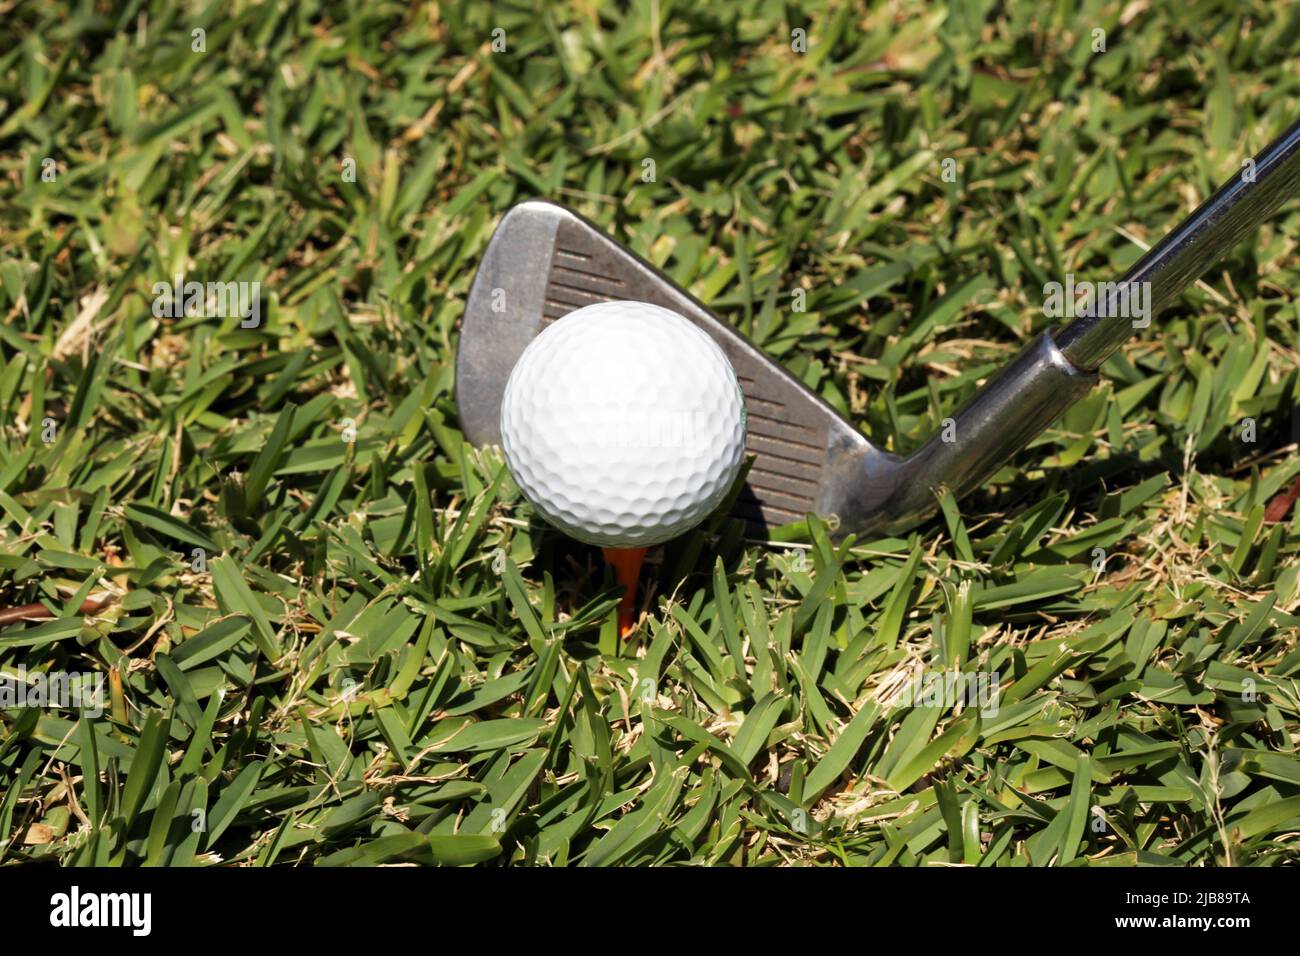 golf ball on tee ready for tee off Stock Photo